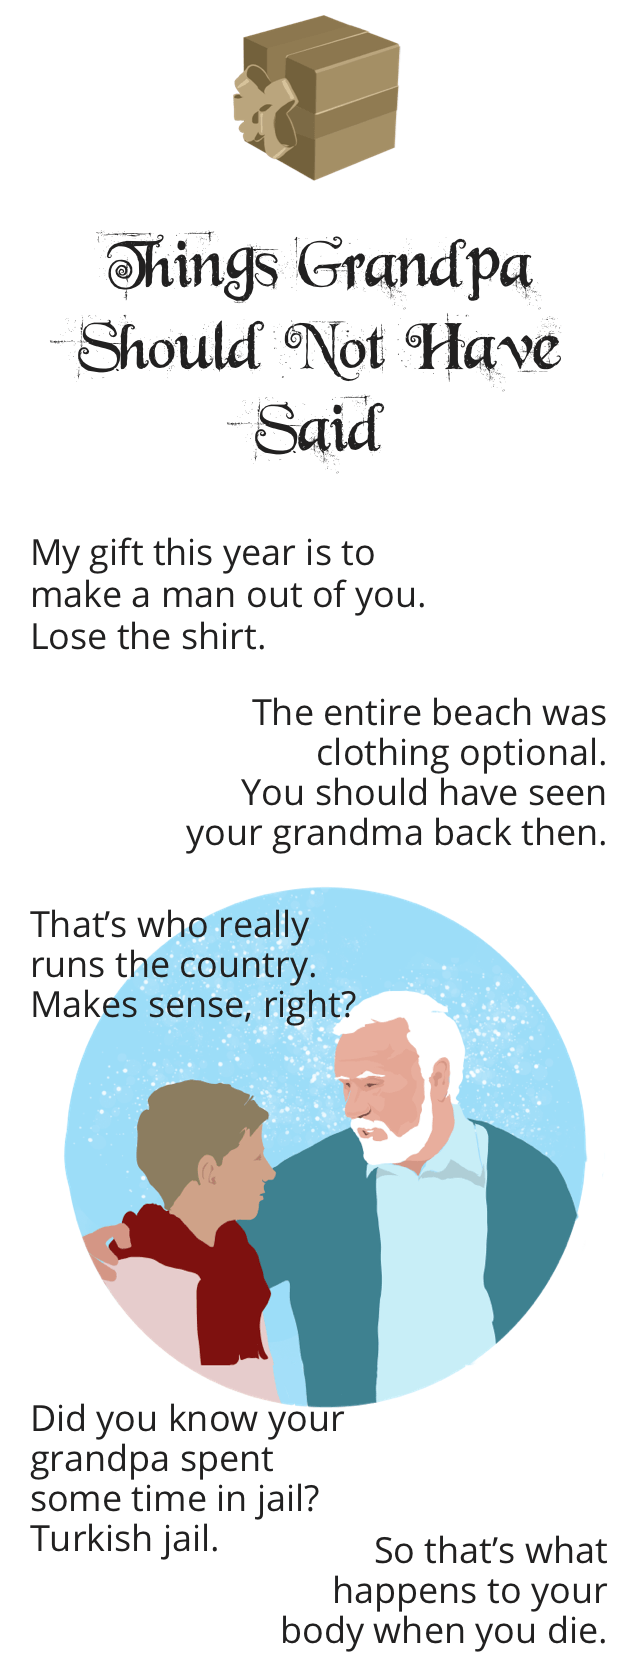 Things Grandpa Should Not Have Said